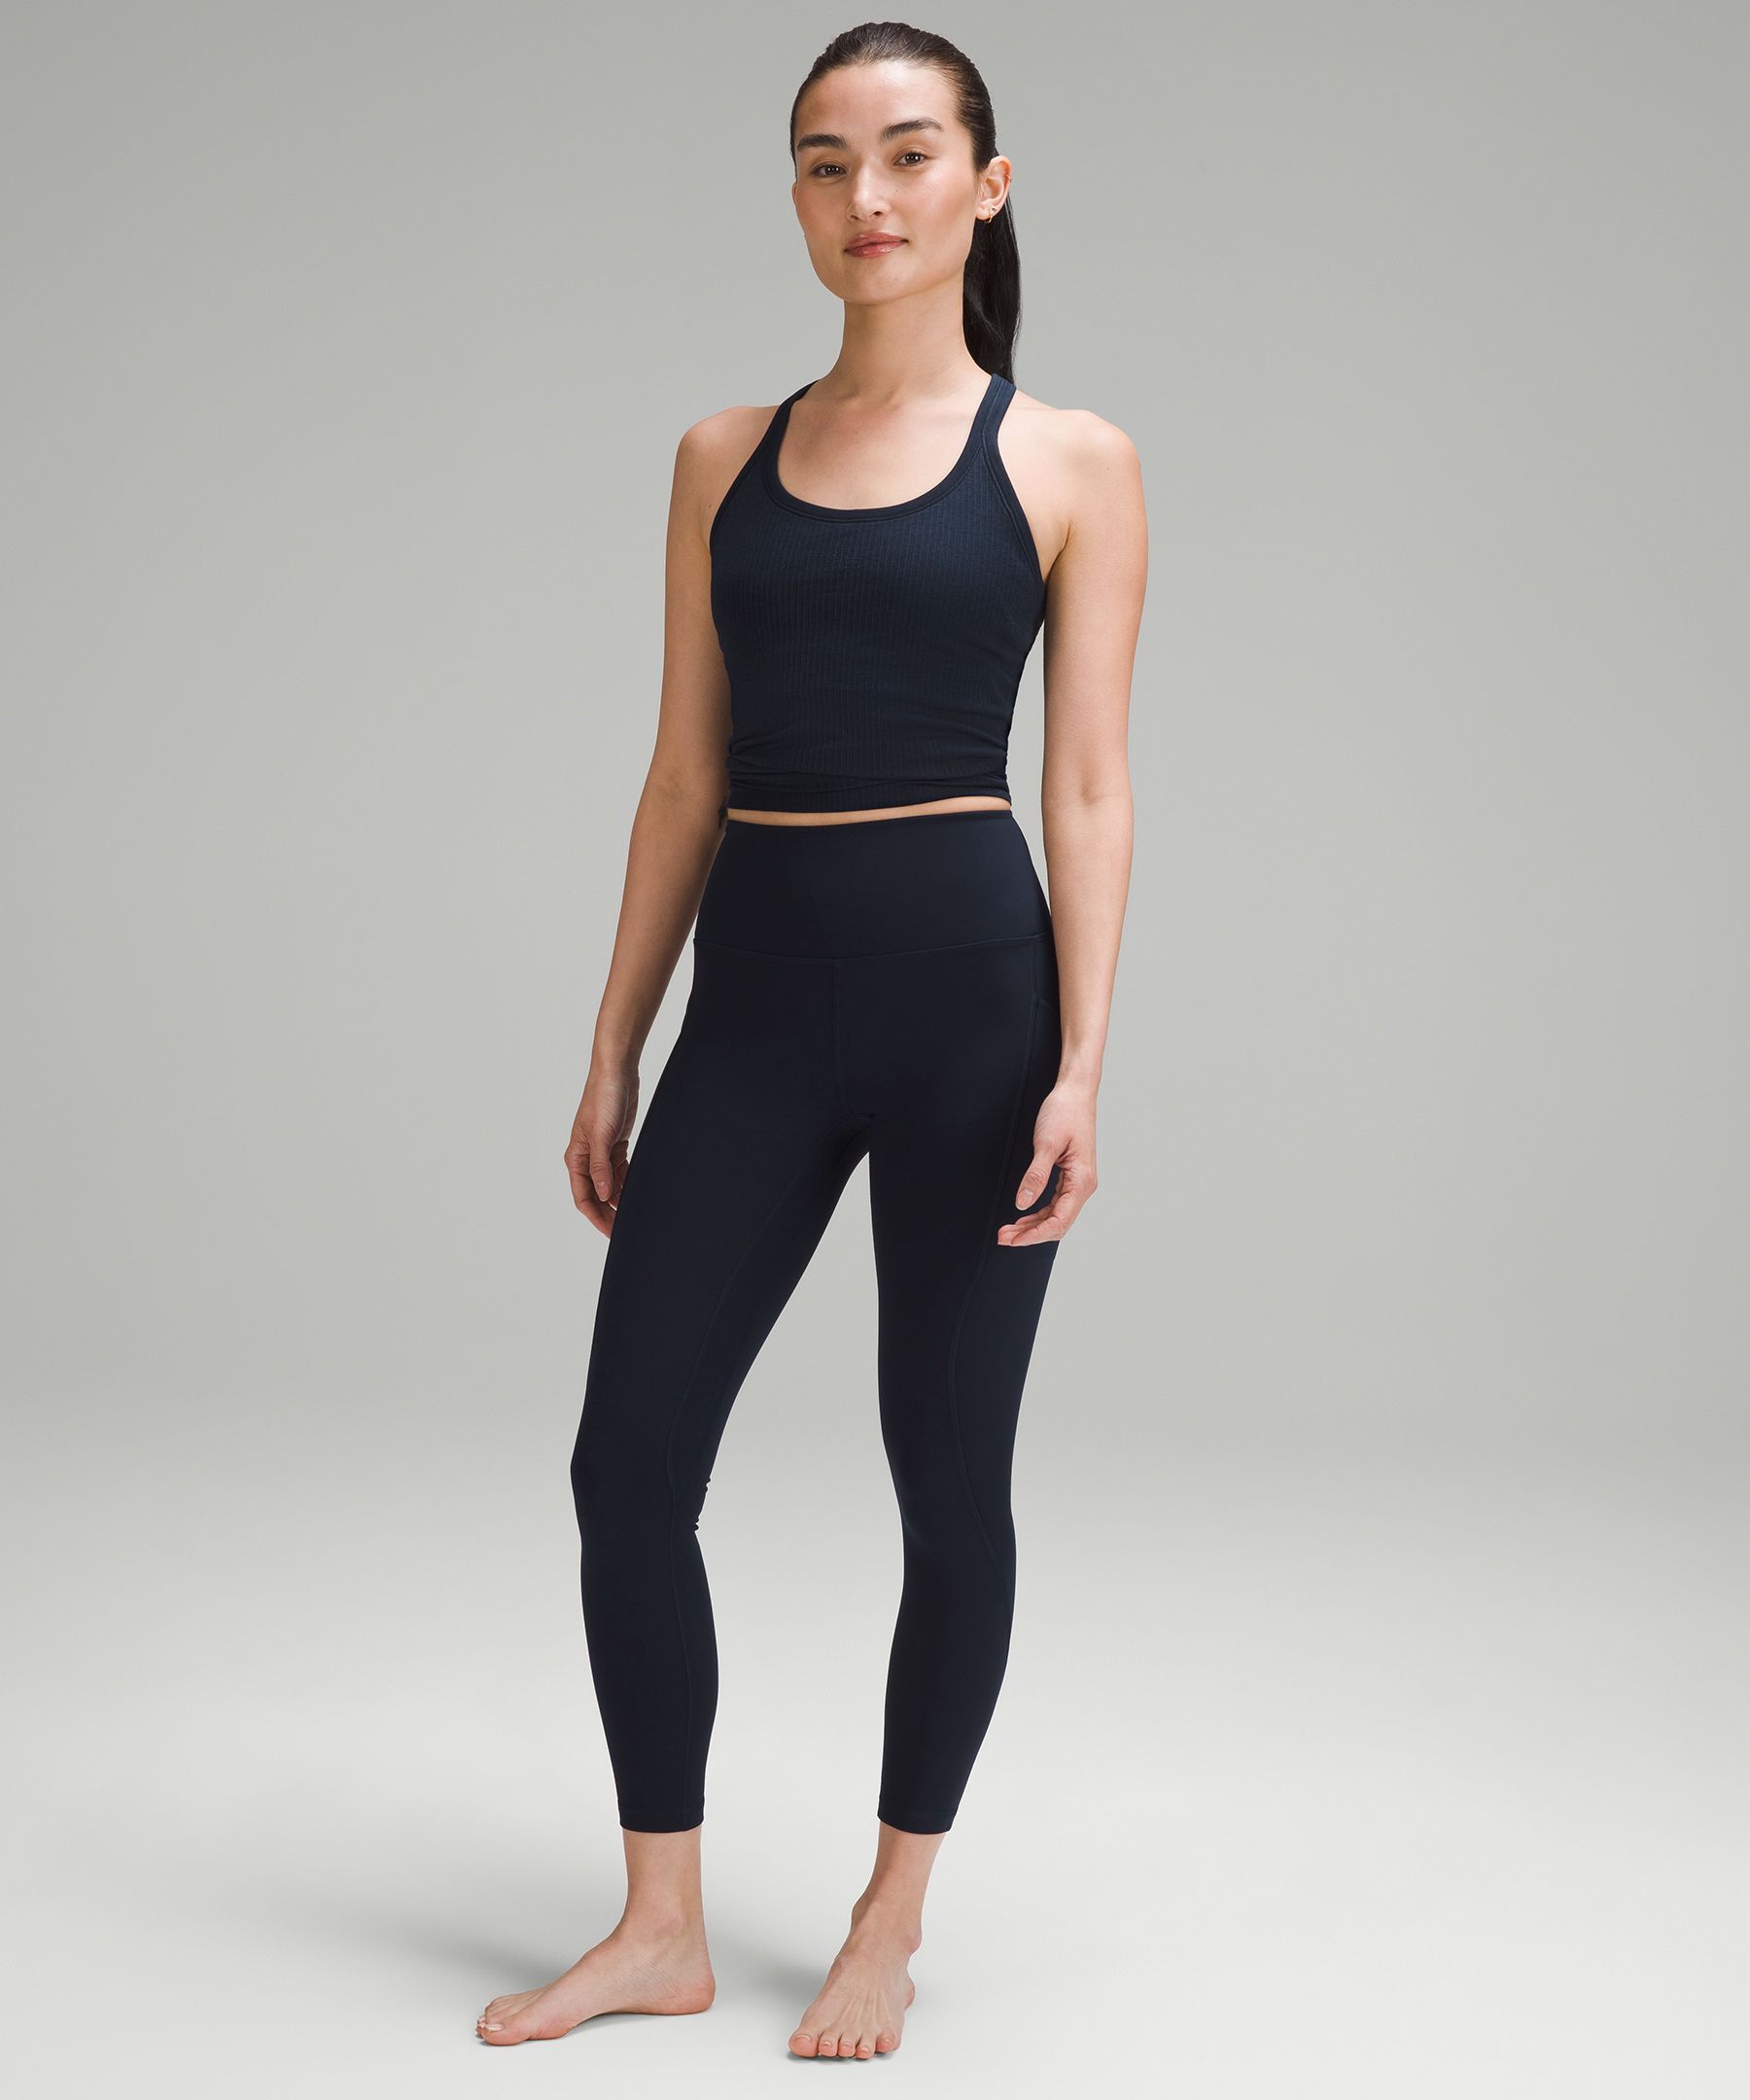 Meghan Markle's favourite Lululemon Align Pants now available with